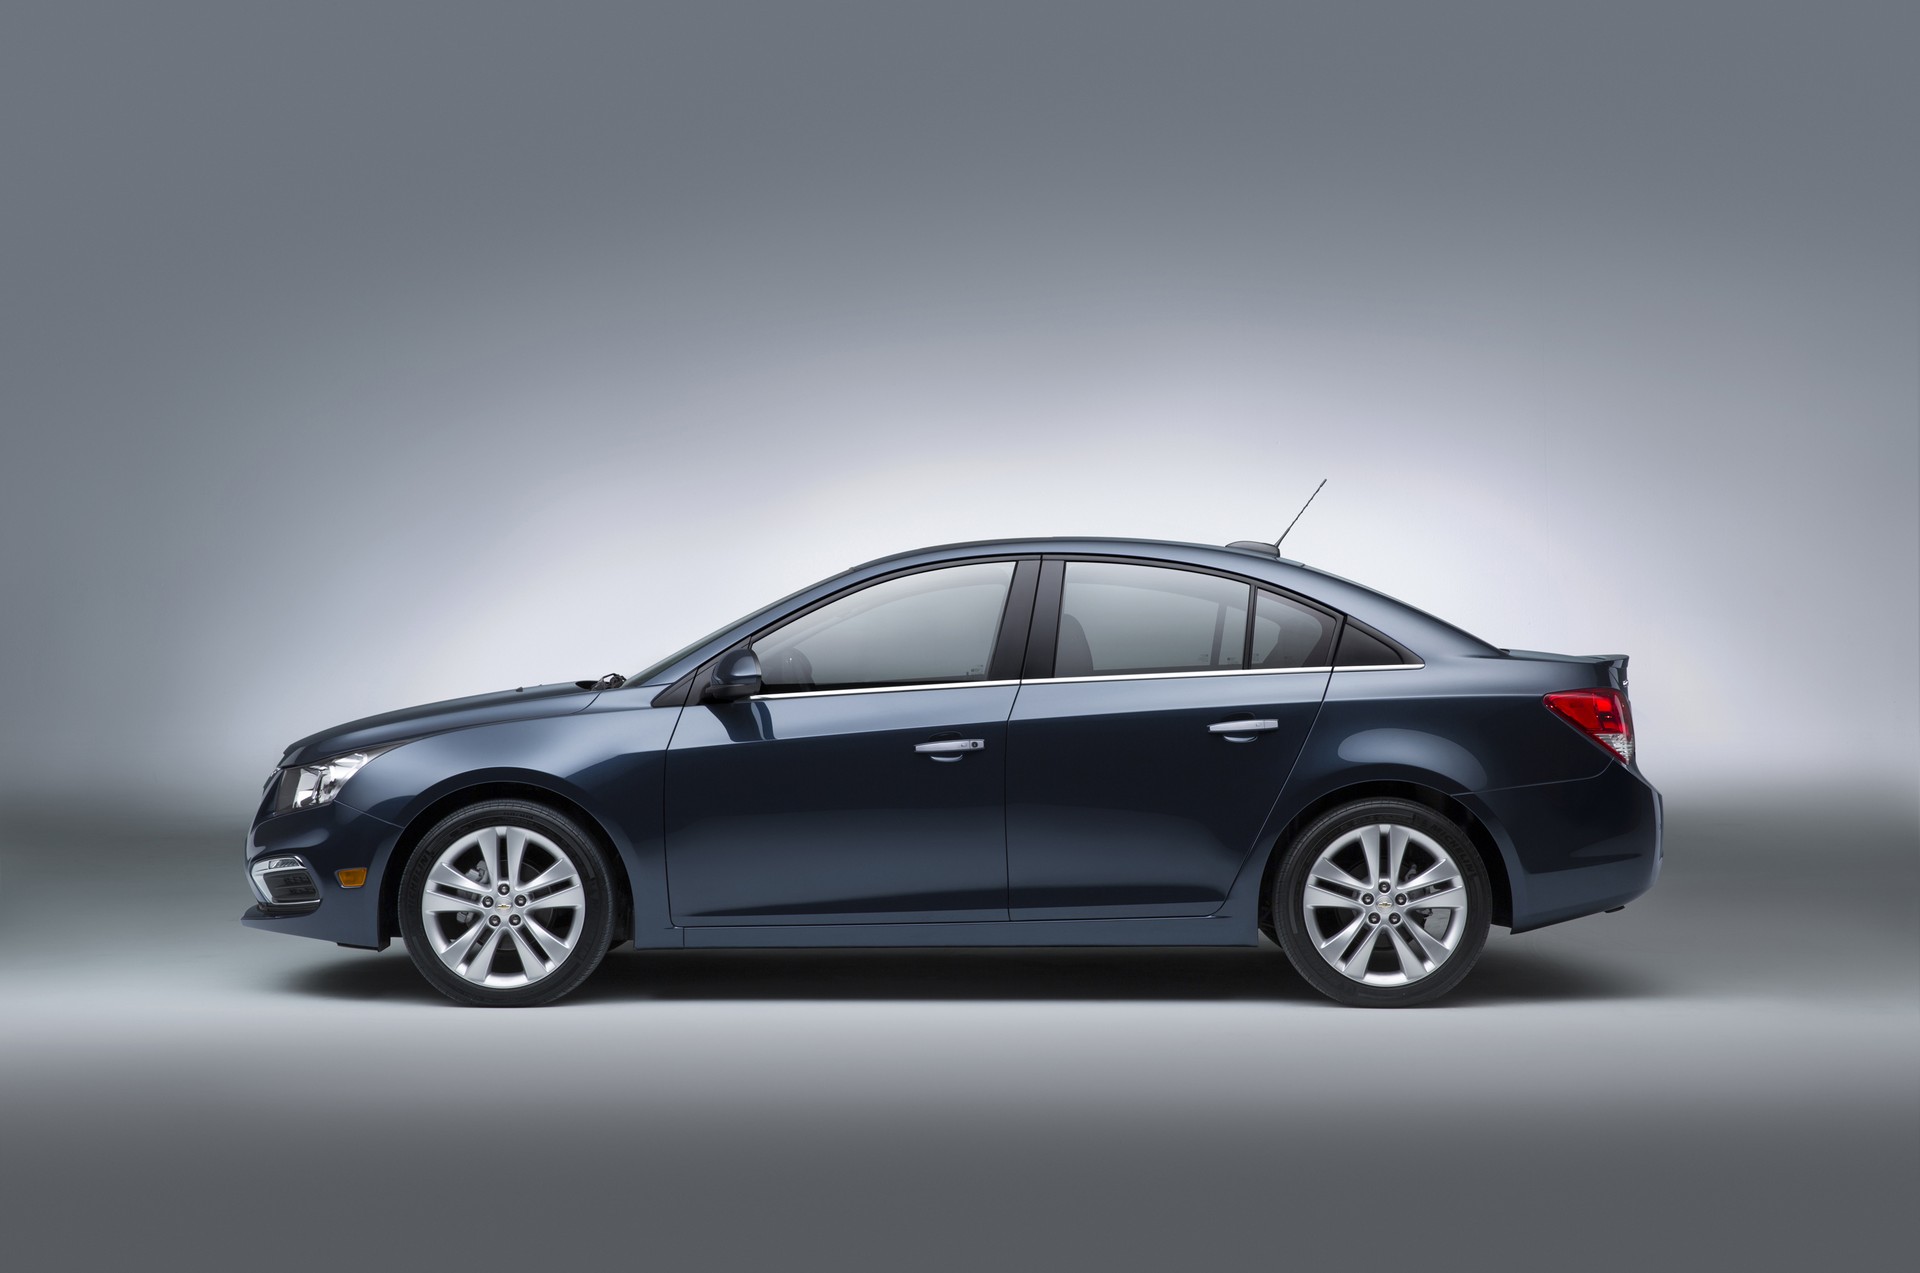 2015 Chevrolet Cruze Chevy Review Ratings Specs Prices